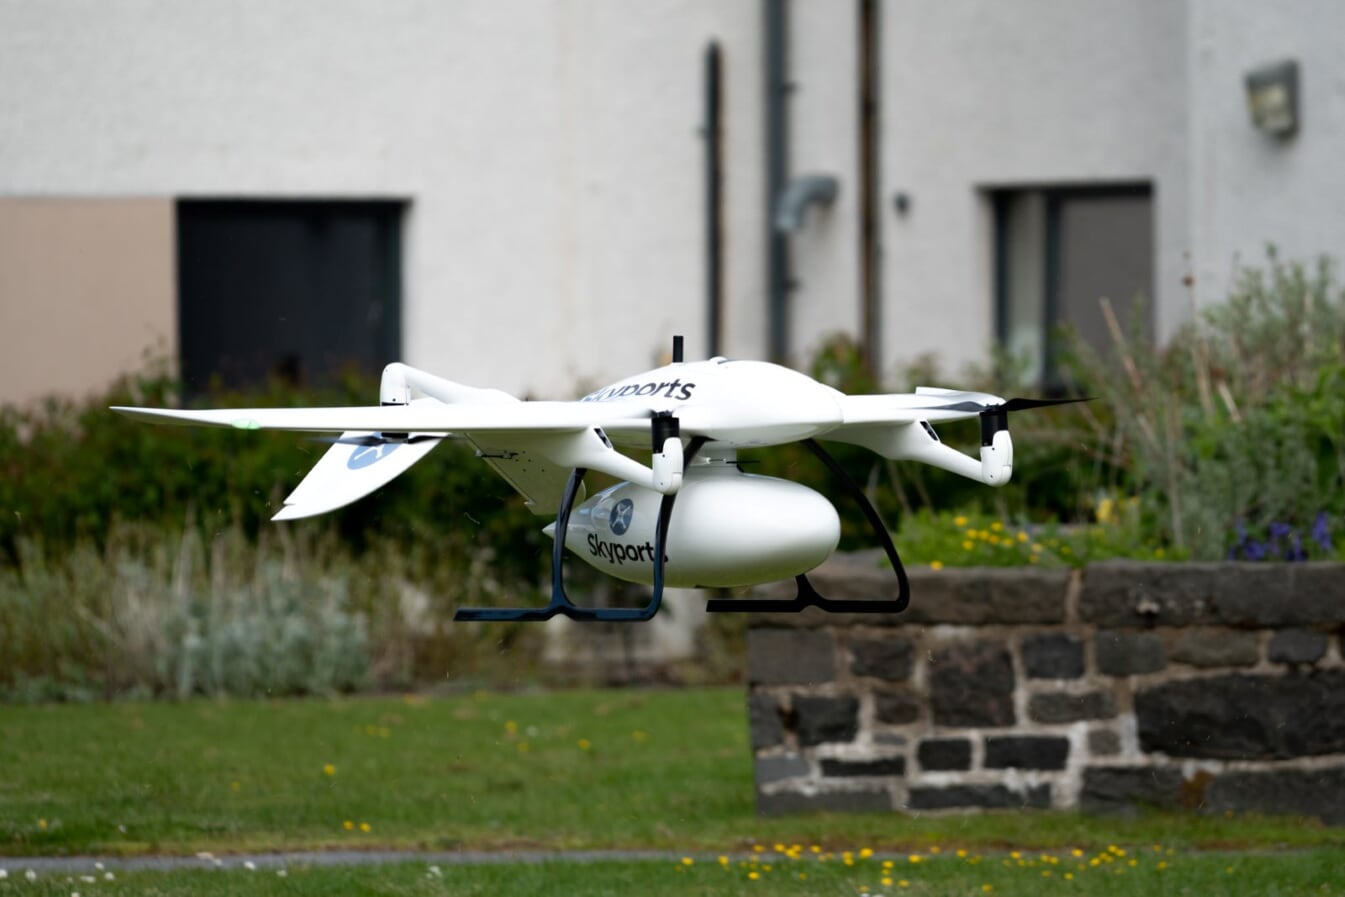 Skyports delivery drone manufactured by Wingcopter. Source: Skyports